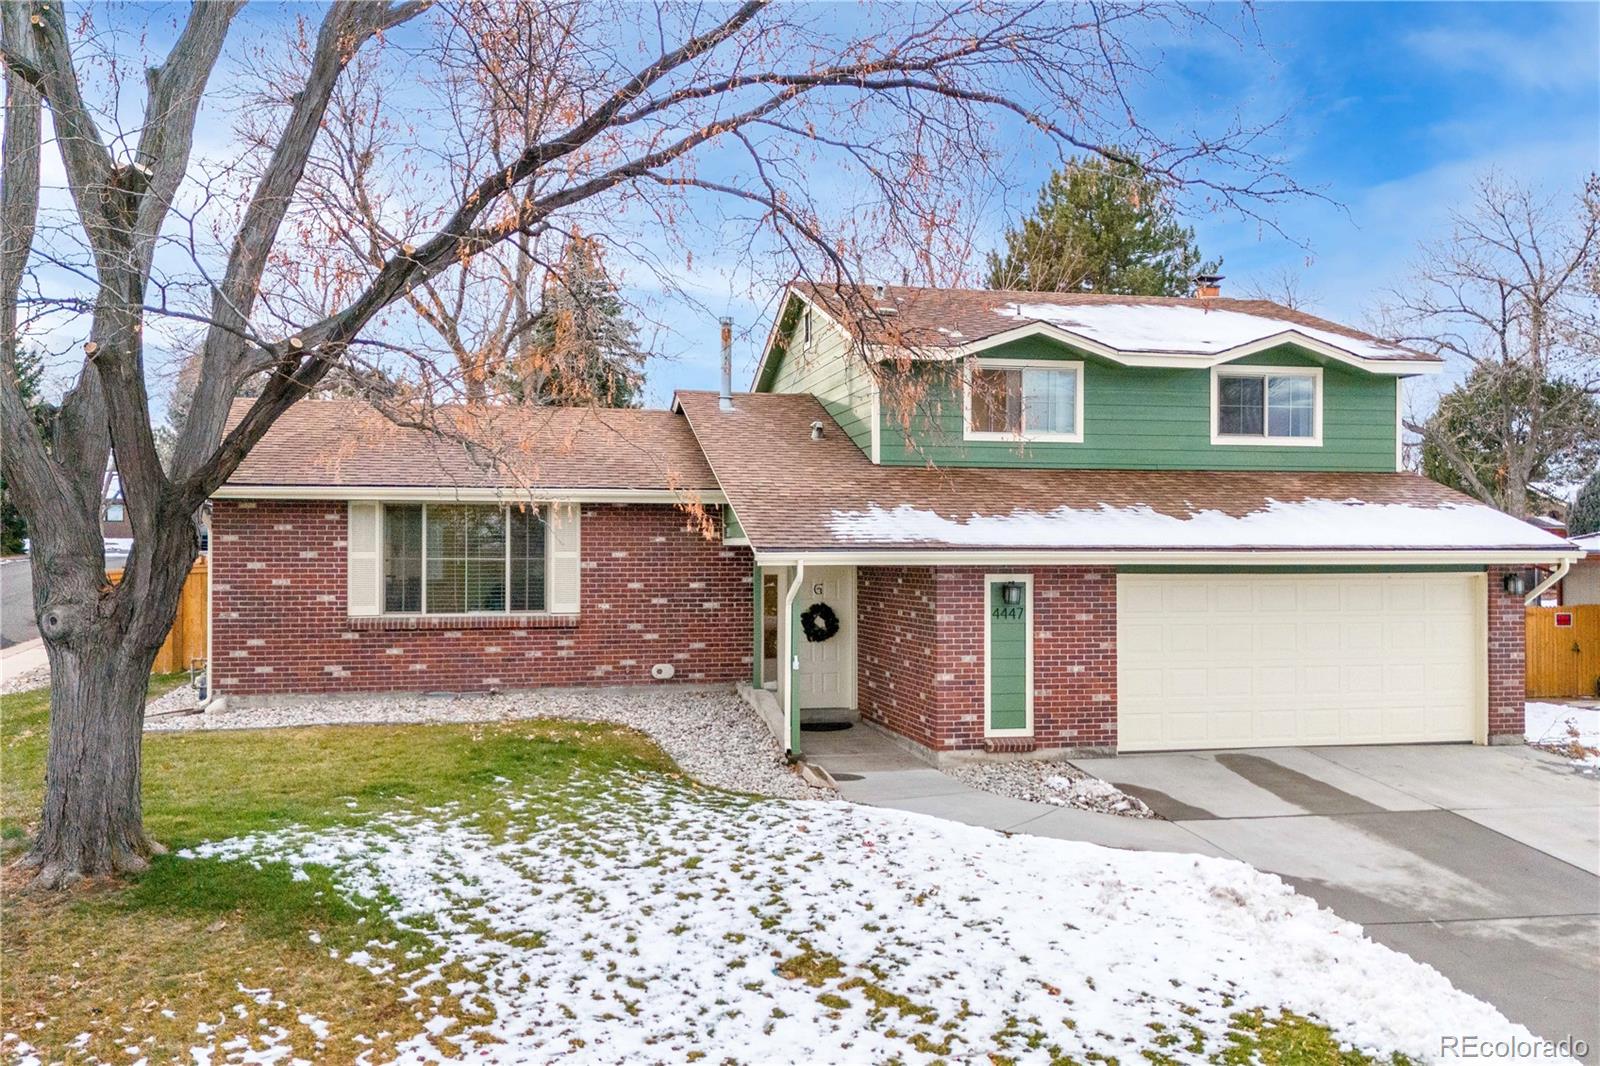 4447 s wolff street, denver sold home. Closed on 2024-02-26 for $728,000.